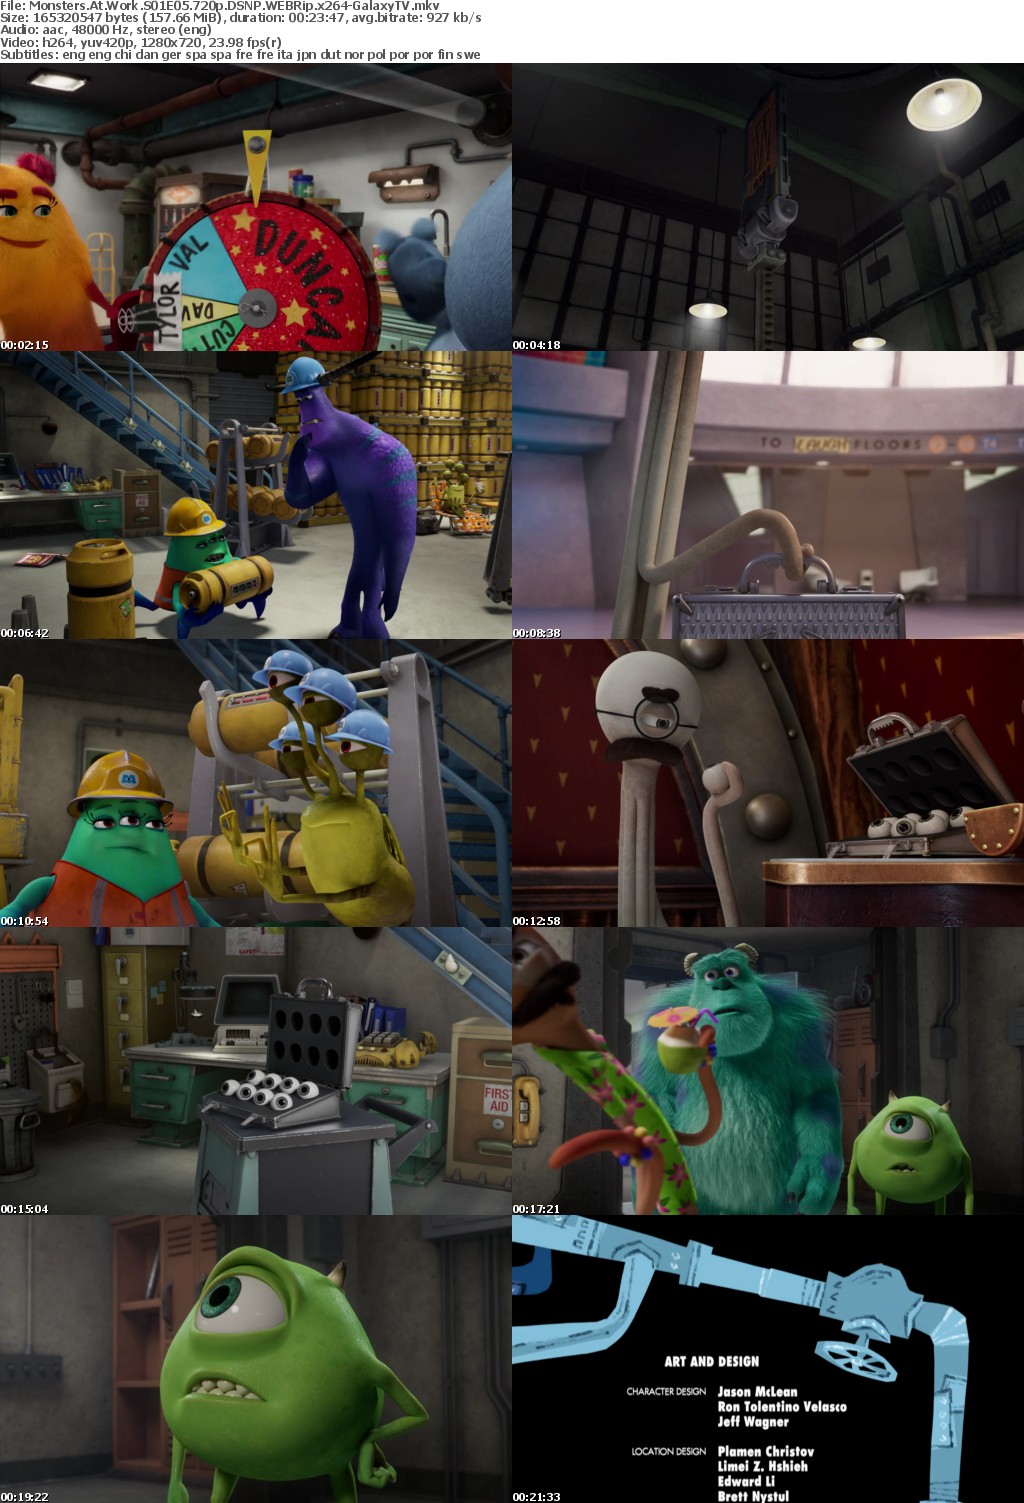 Monsters At Work S01 COMPLETE 720p DSNP WEBRip x264-GalaxyTV